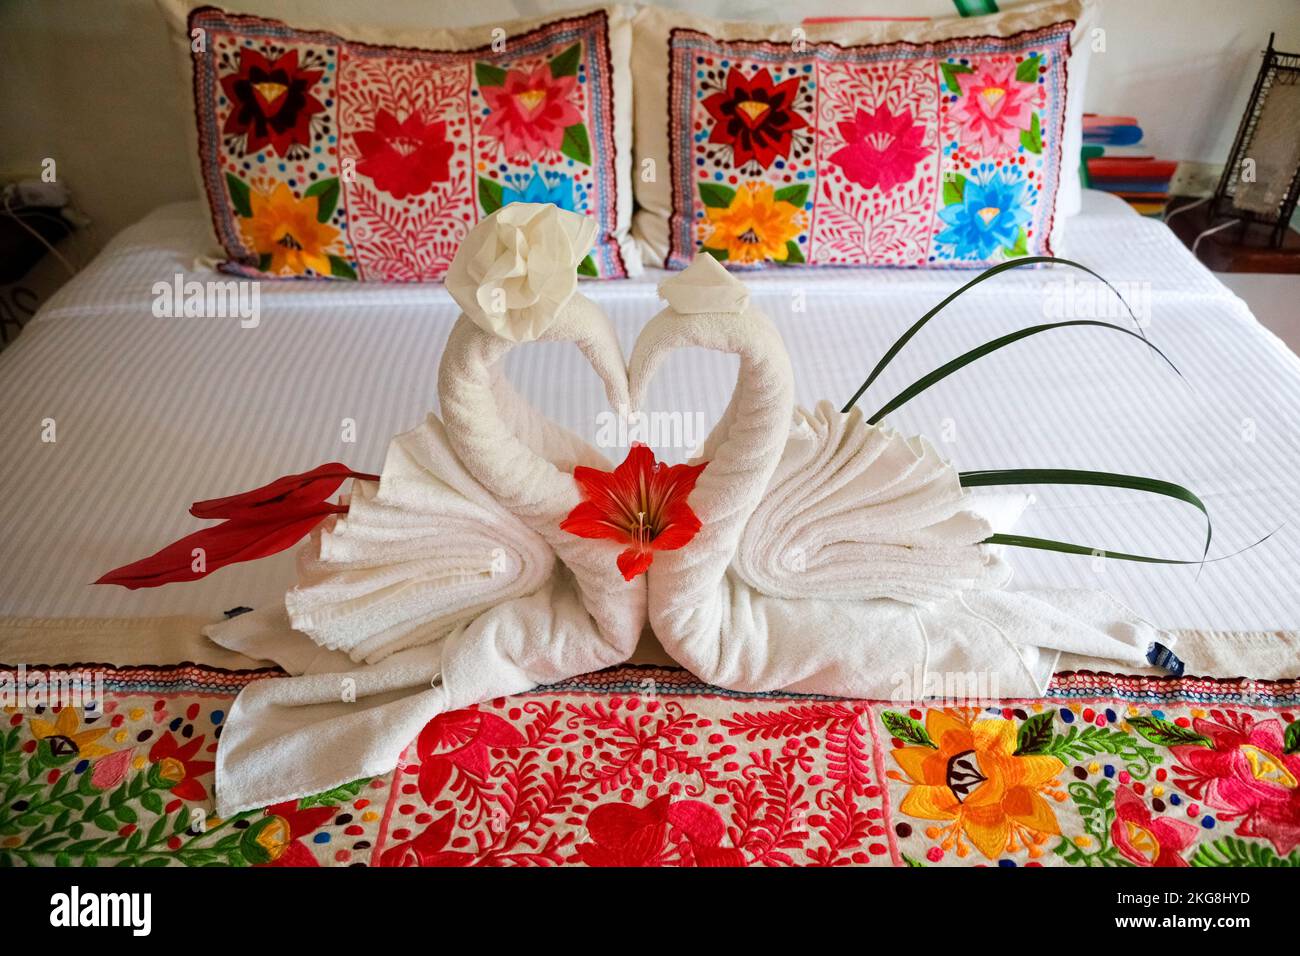 Romantic bed decor with towel swans Stock Photo